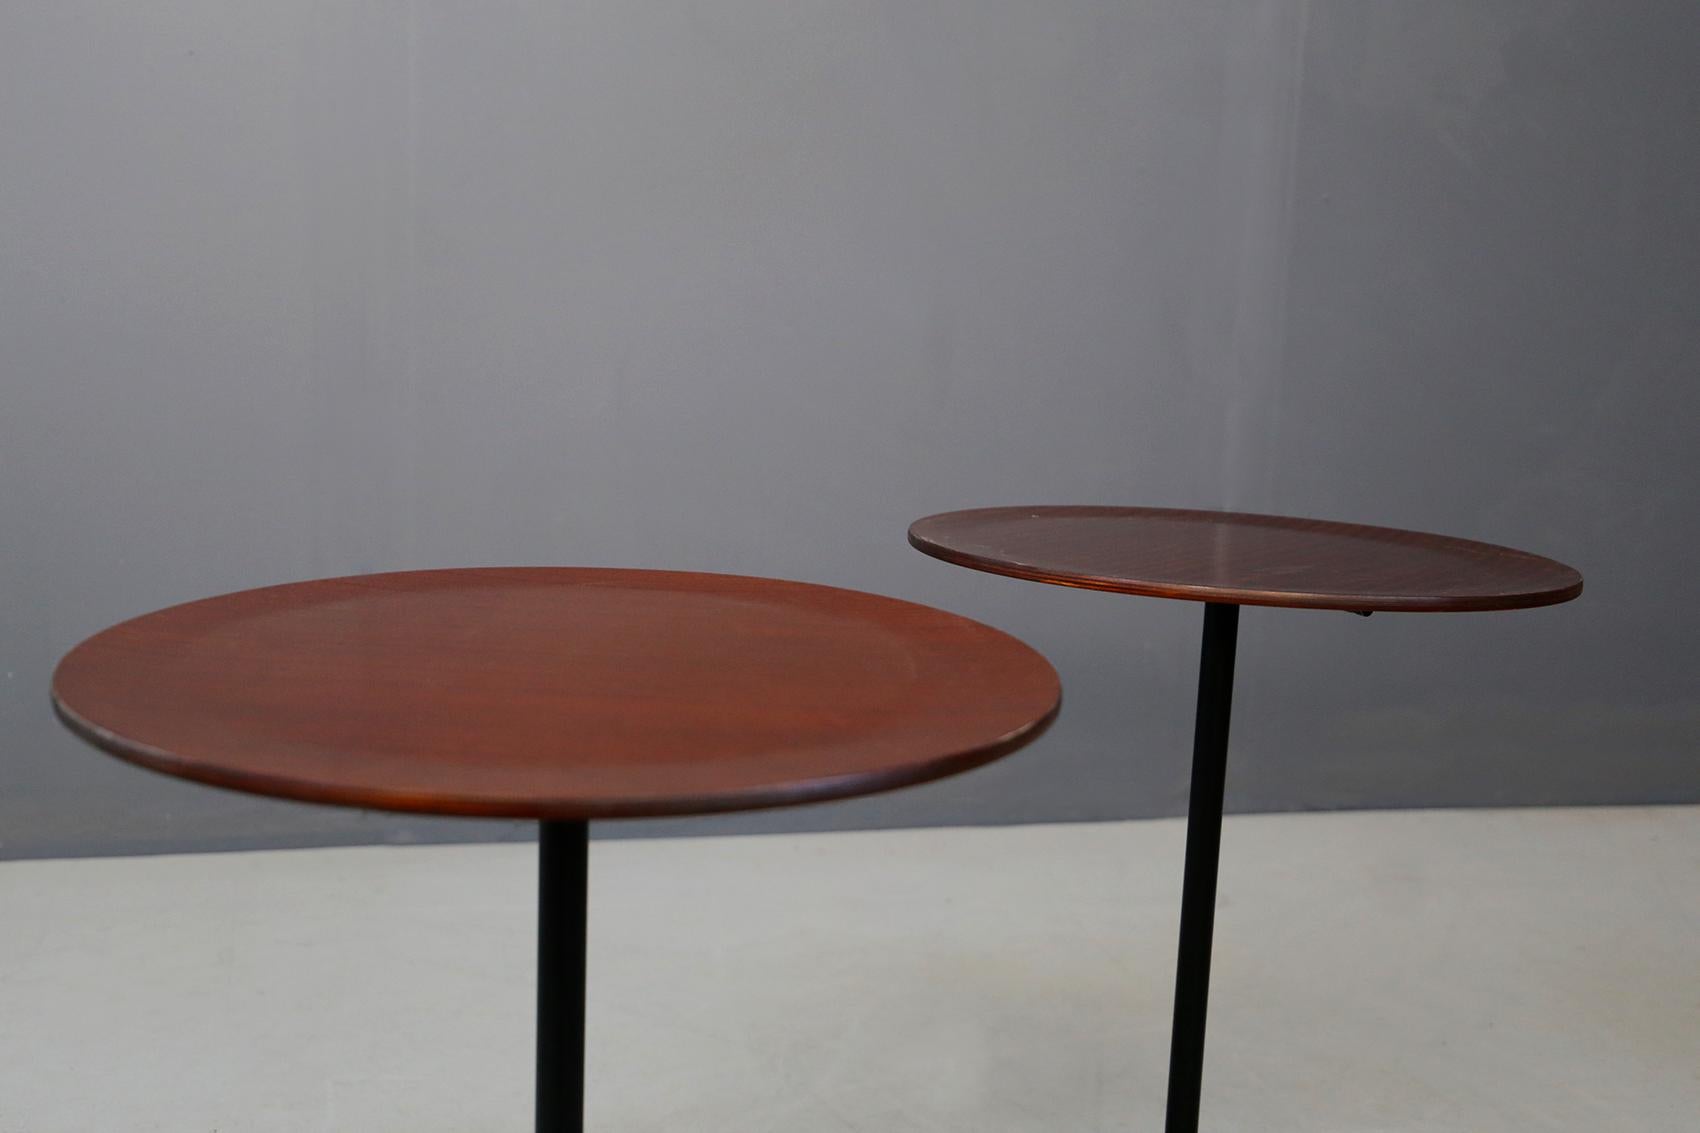 Pair of tables by Osvaldo Borsani for Tecno Model 744. The seat is in mahogany lacquered curved plywood on a painted iron tripod base that ends with brass feet. The pair of coffee tables is ideal on the sides of sofas or to complete design living